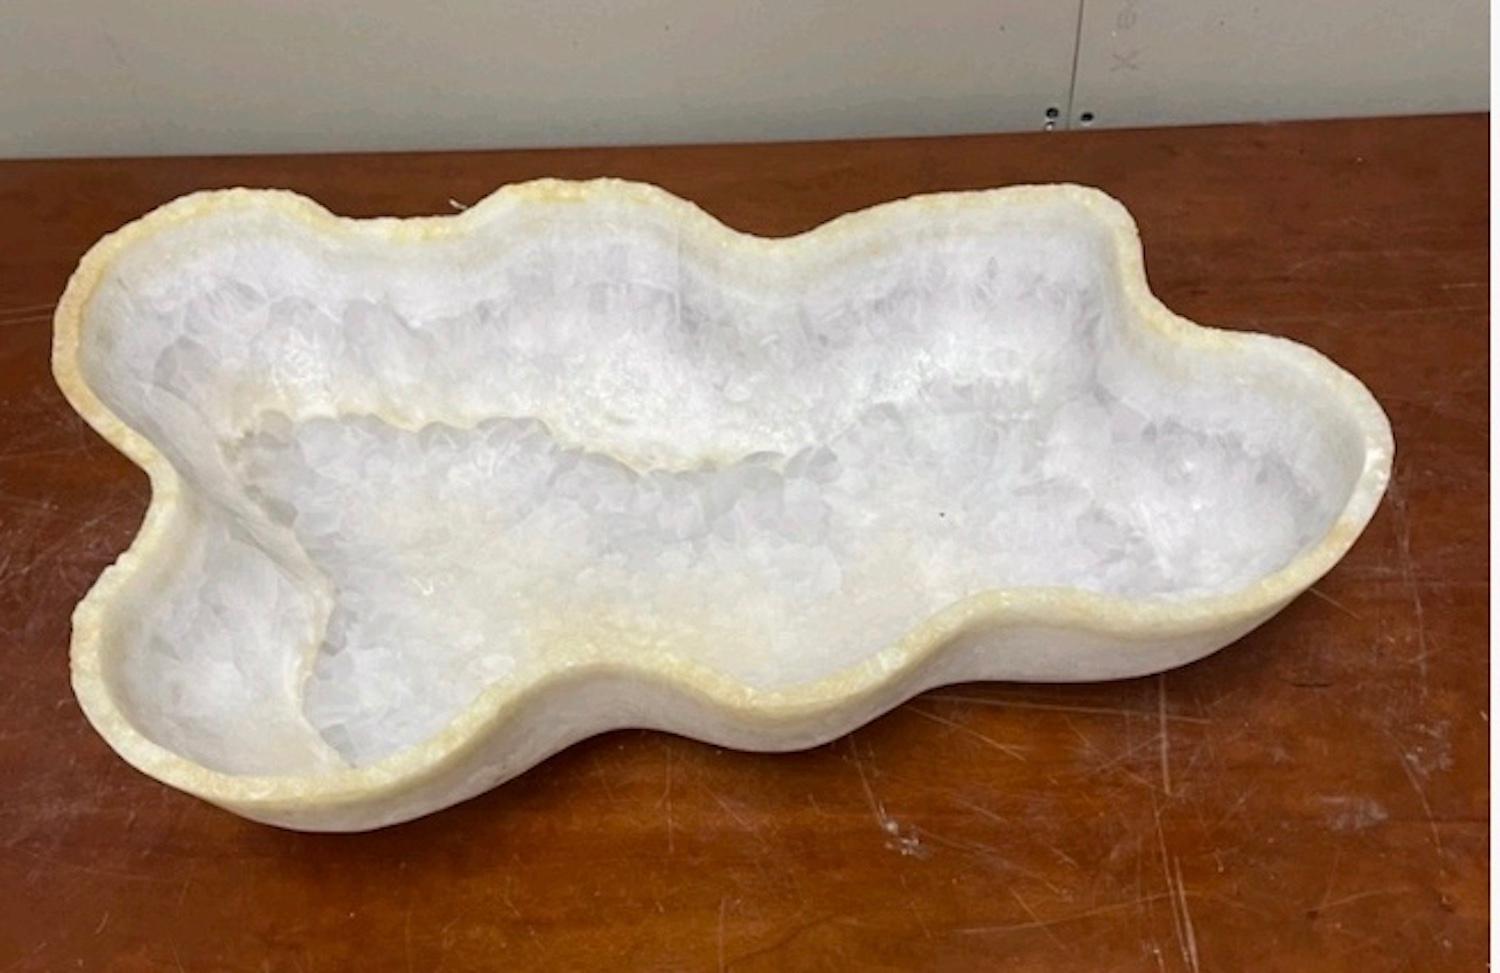 A large hand carved white and ivory live edge onyx bowl or centerpiece in an impressive size is comprised of white semi-opaque and clear quartz with bands of ivory. This utilitarian and stunning centerpiece makes a beautiful addition to any space